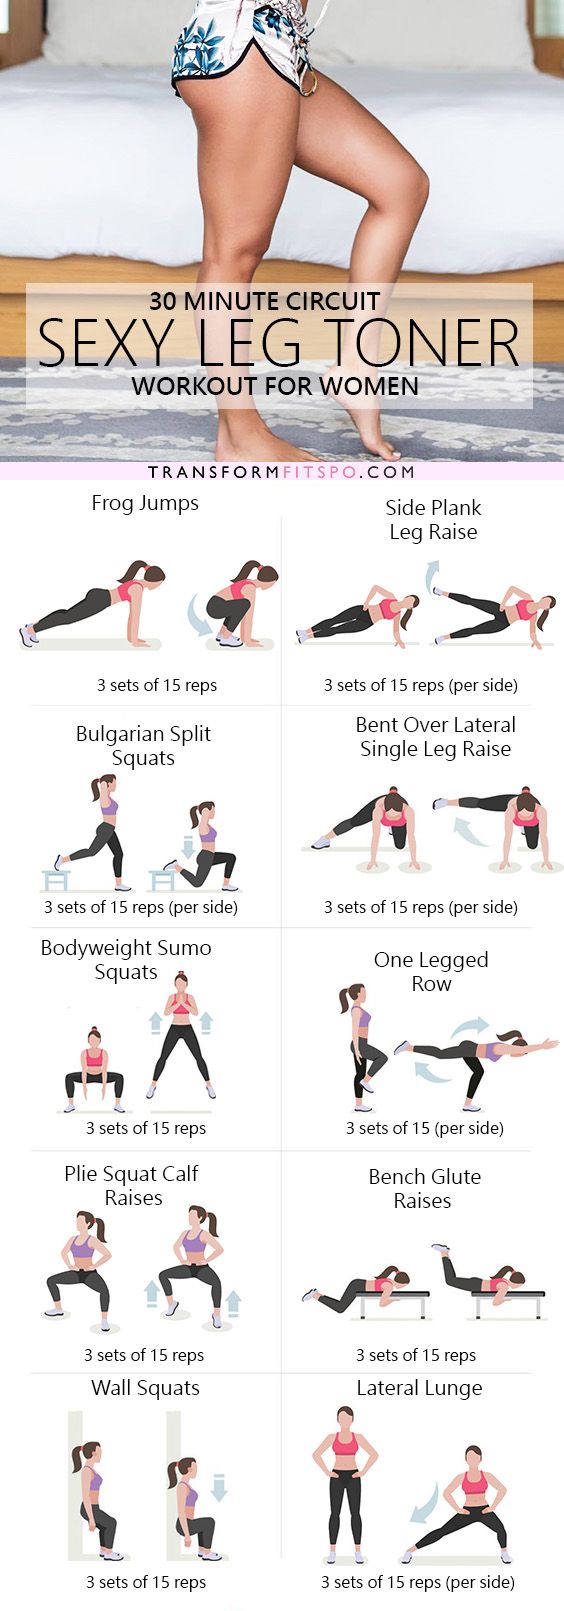 Hourglass Figure Workout Plan At Home Kayaworkout Co